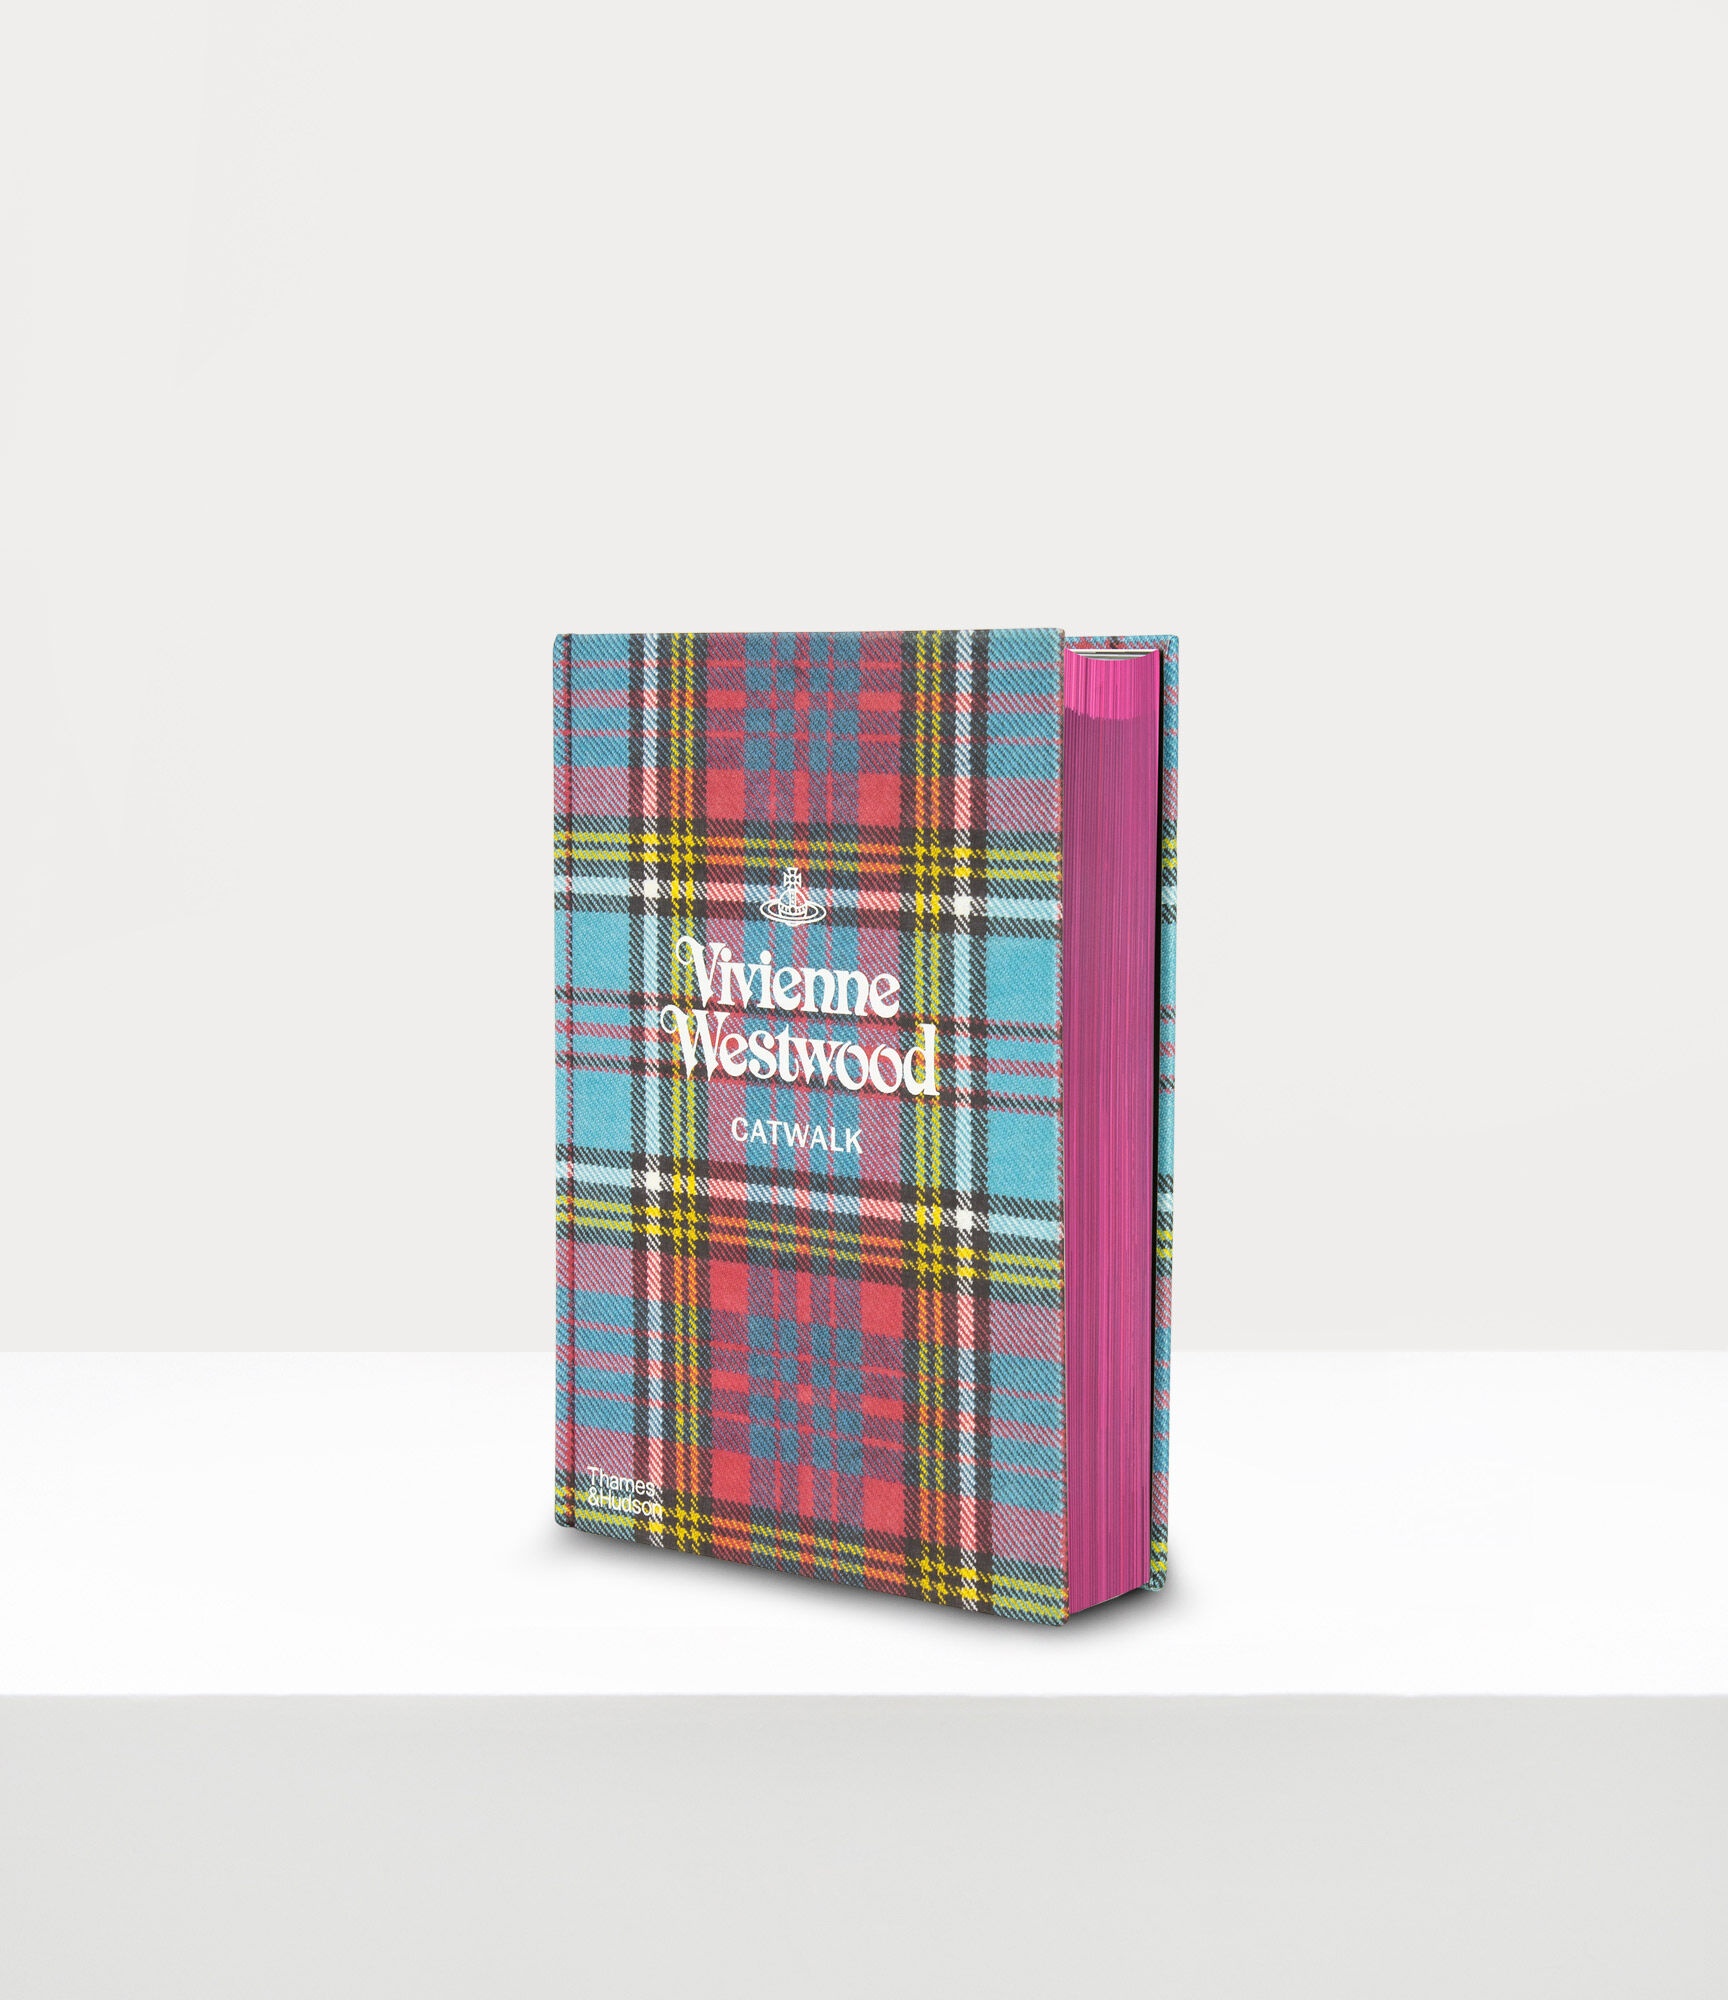 LIMITED EDITION VIVIENNE WESTWOOD CATWALK: THE COMPLETE COLLECTIONS - 3